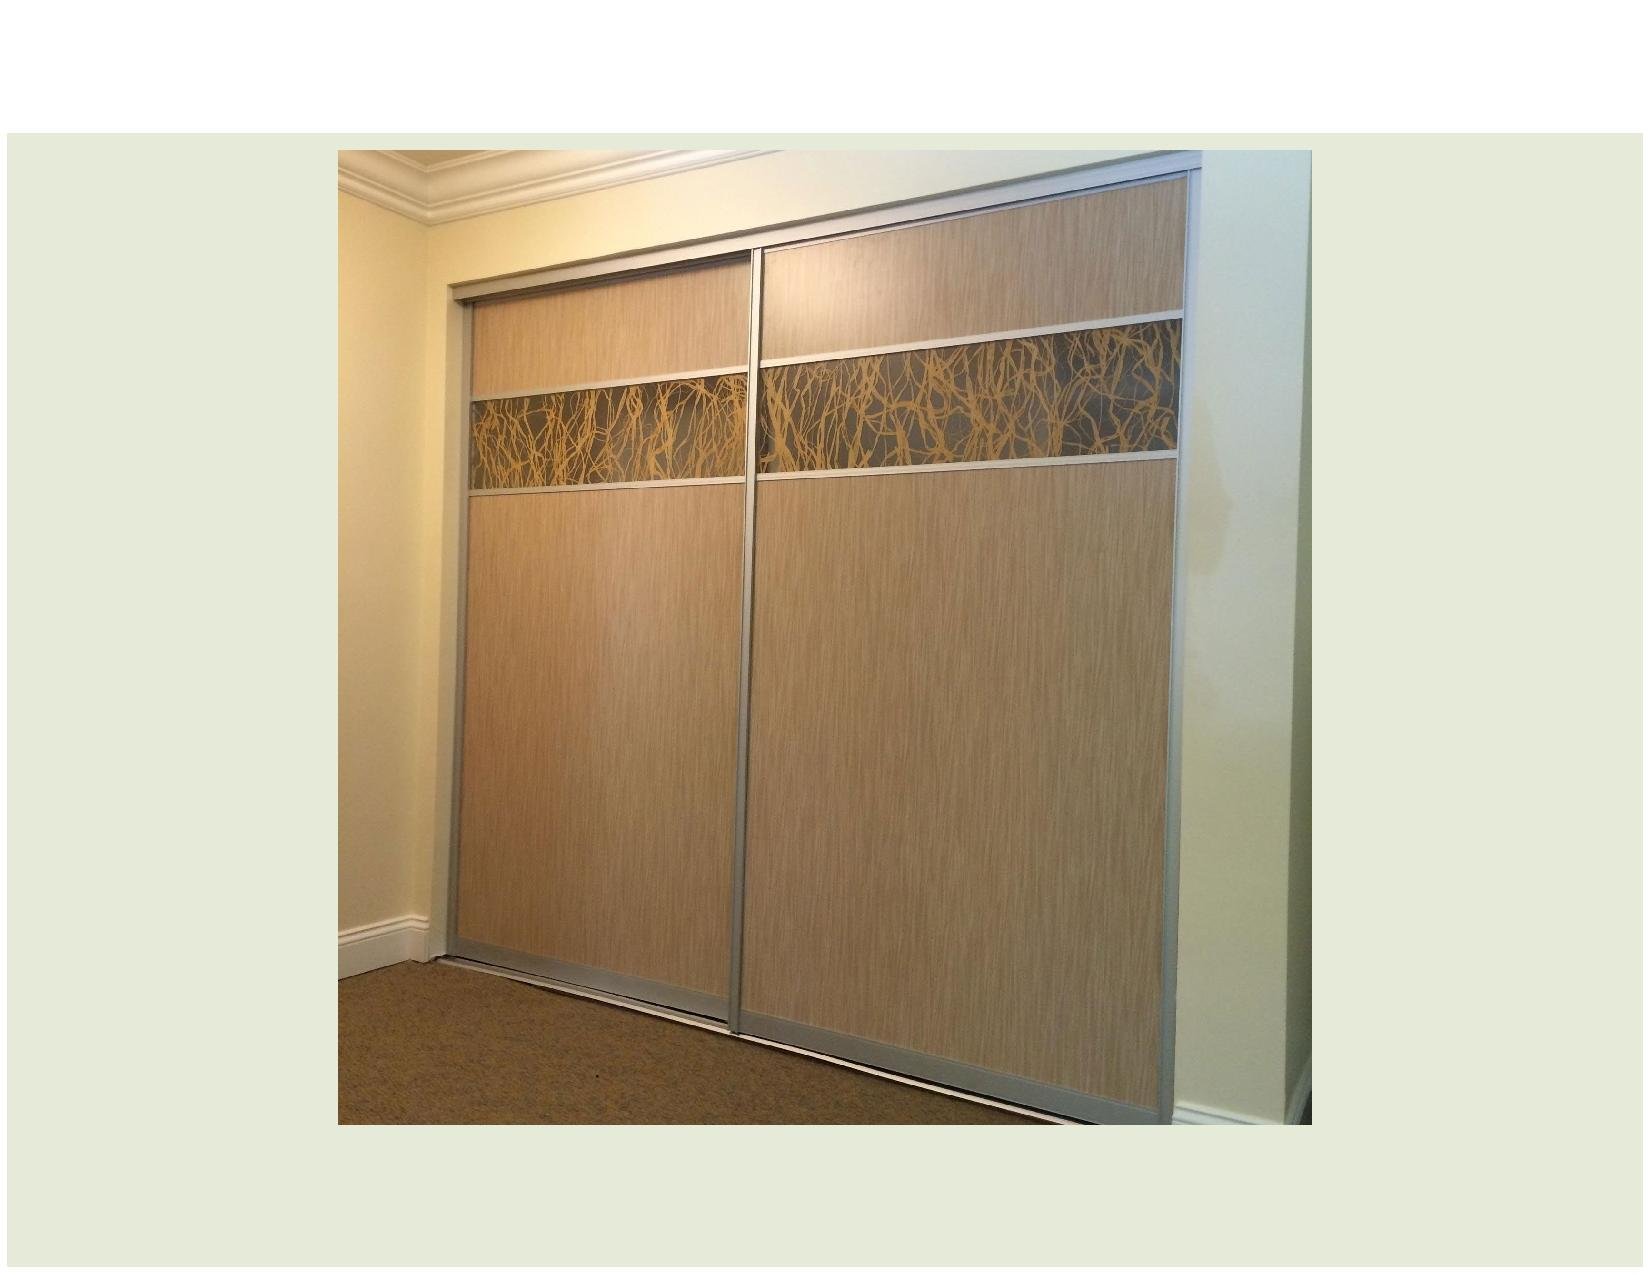 2014-06-27_Sliding Doors_HPL with Lumicor Decorative Resin-PX-Cropped